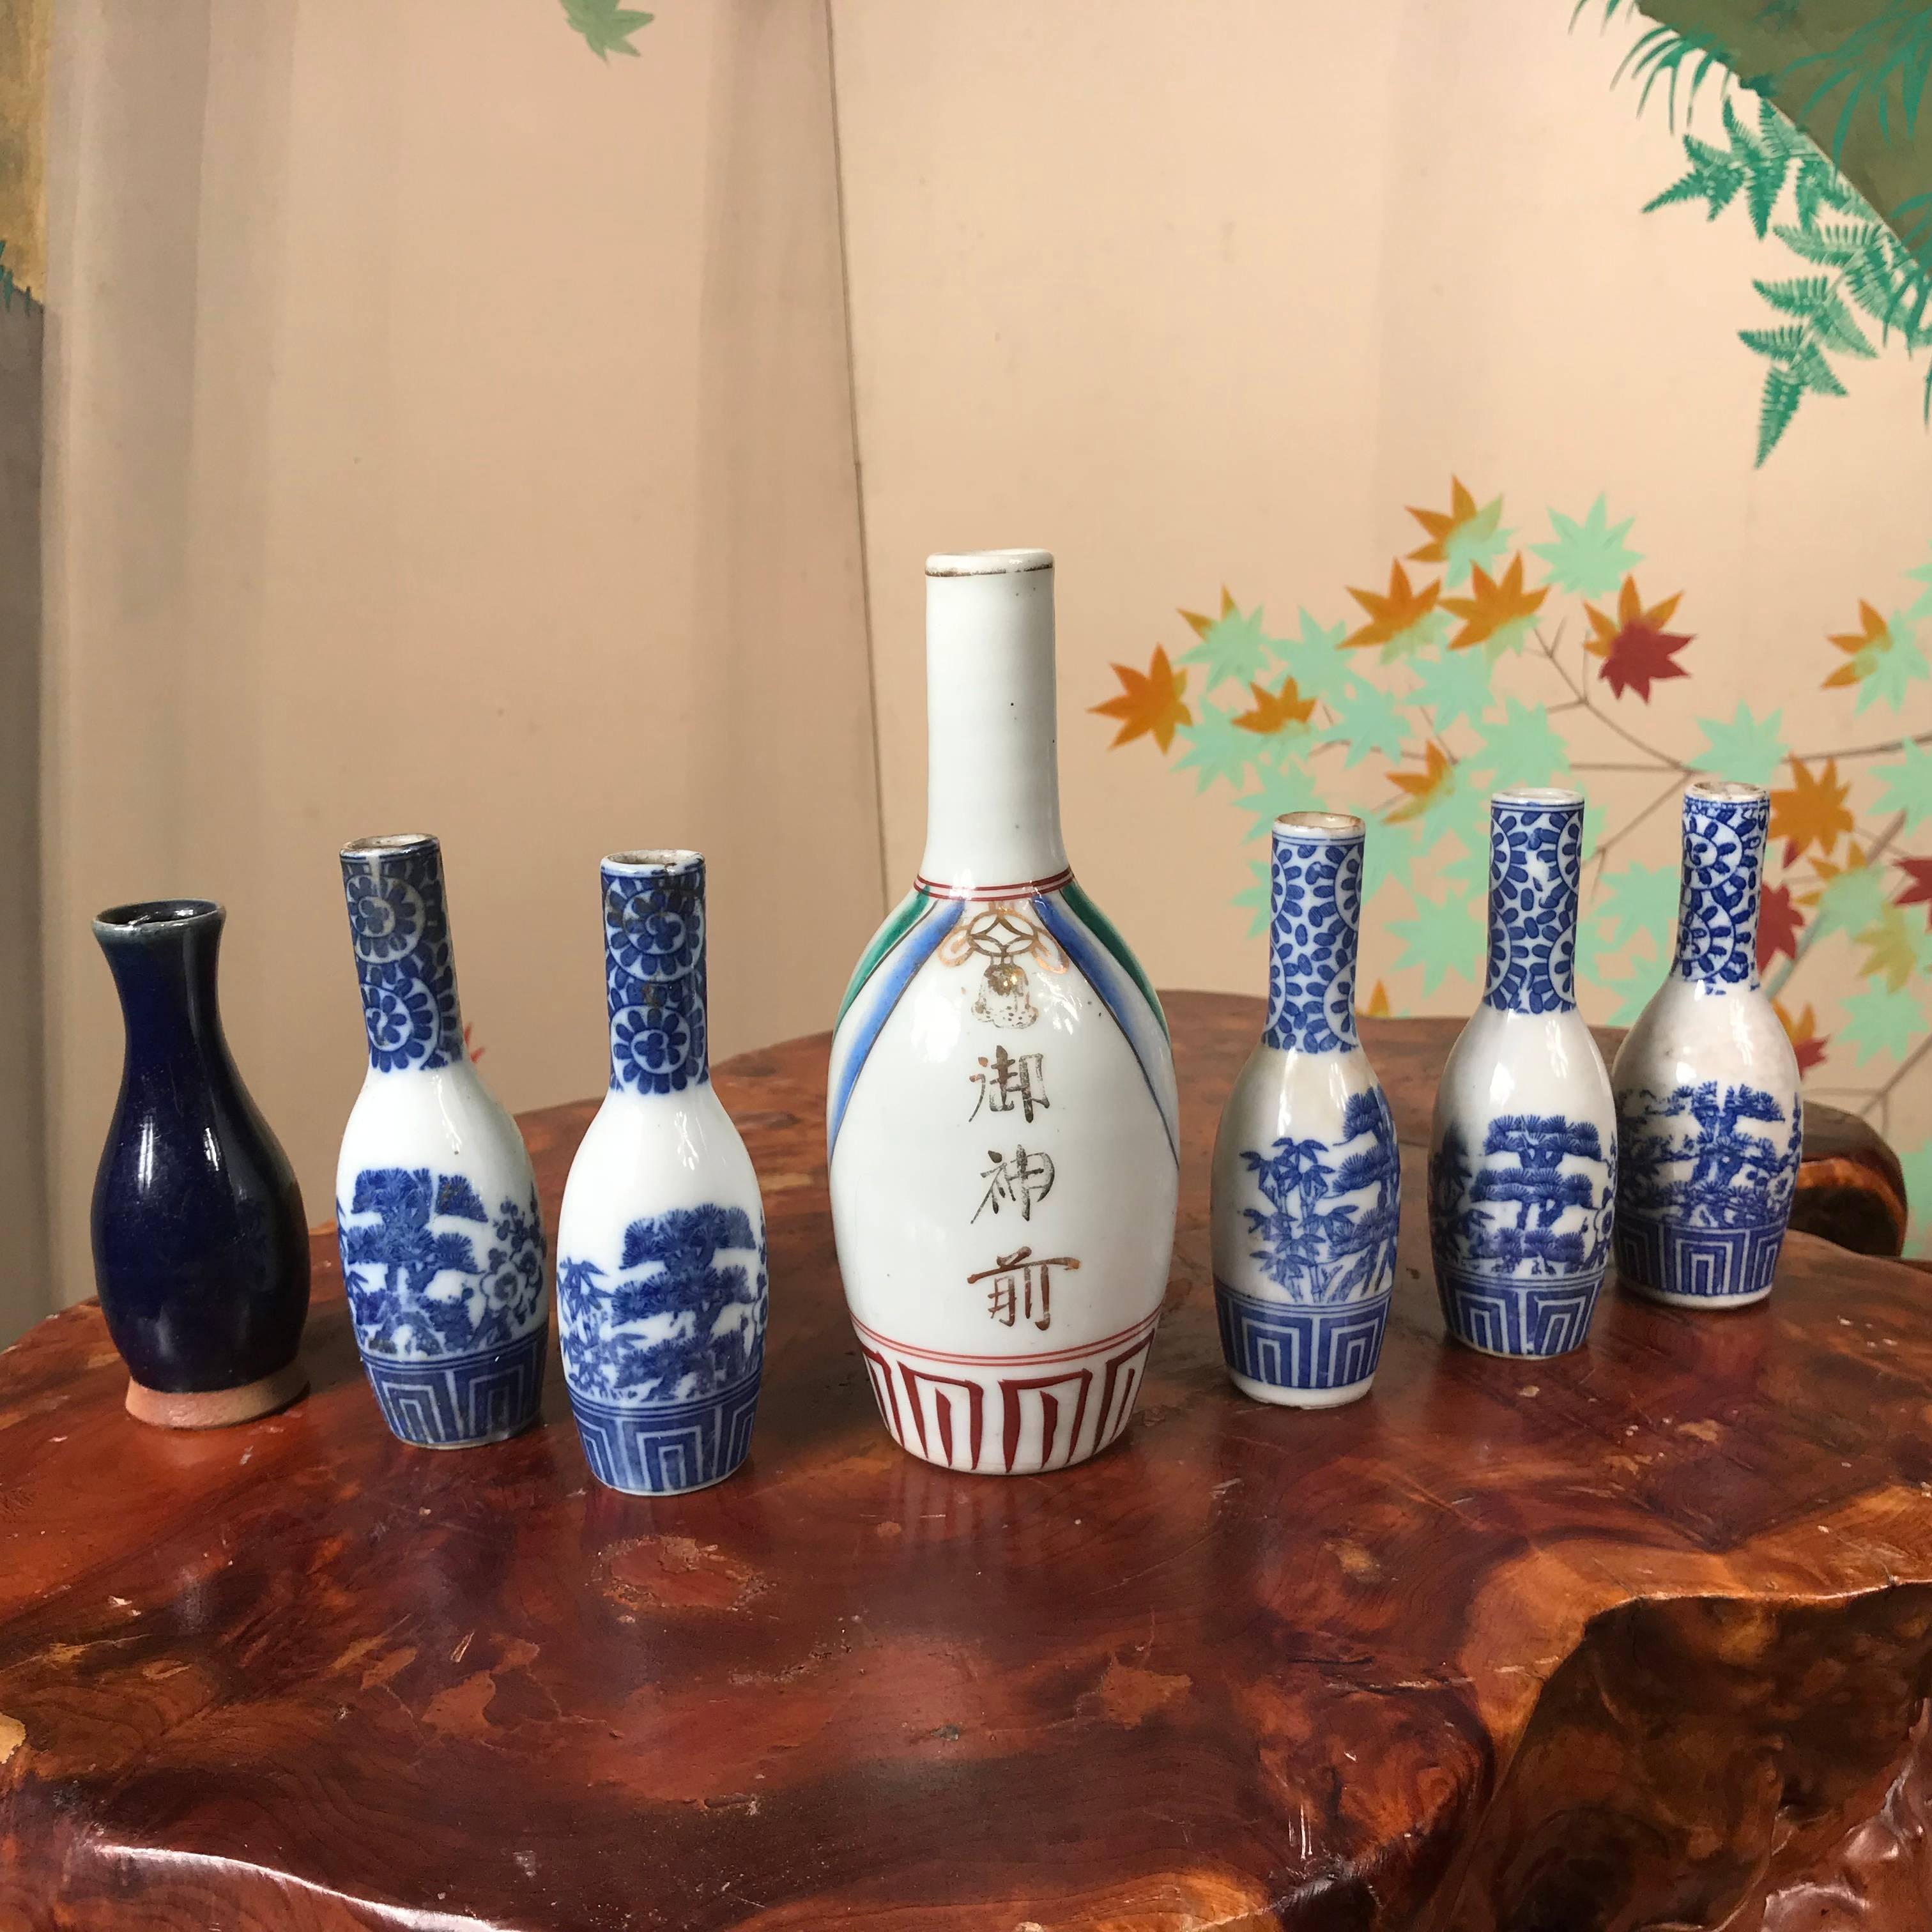 Japan, a collection of seven antique blue and white and iron red multi glazed porcelain sake bottles, Meiji period. These are beautiful little gems, hand-painted in Classic floral patterns from the Arita kilns. Very good condition. Make unique bud